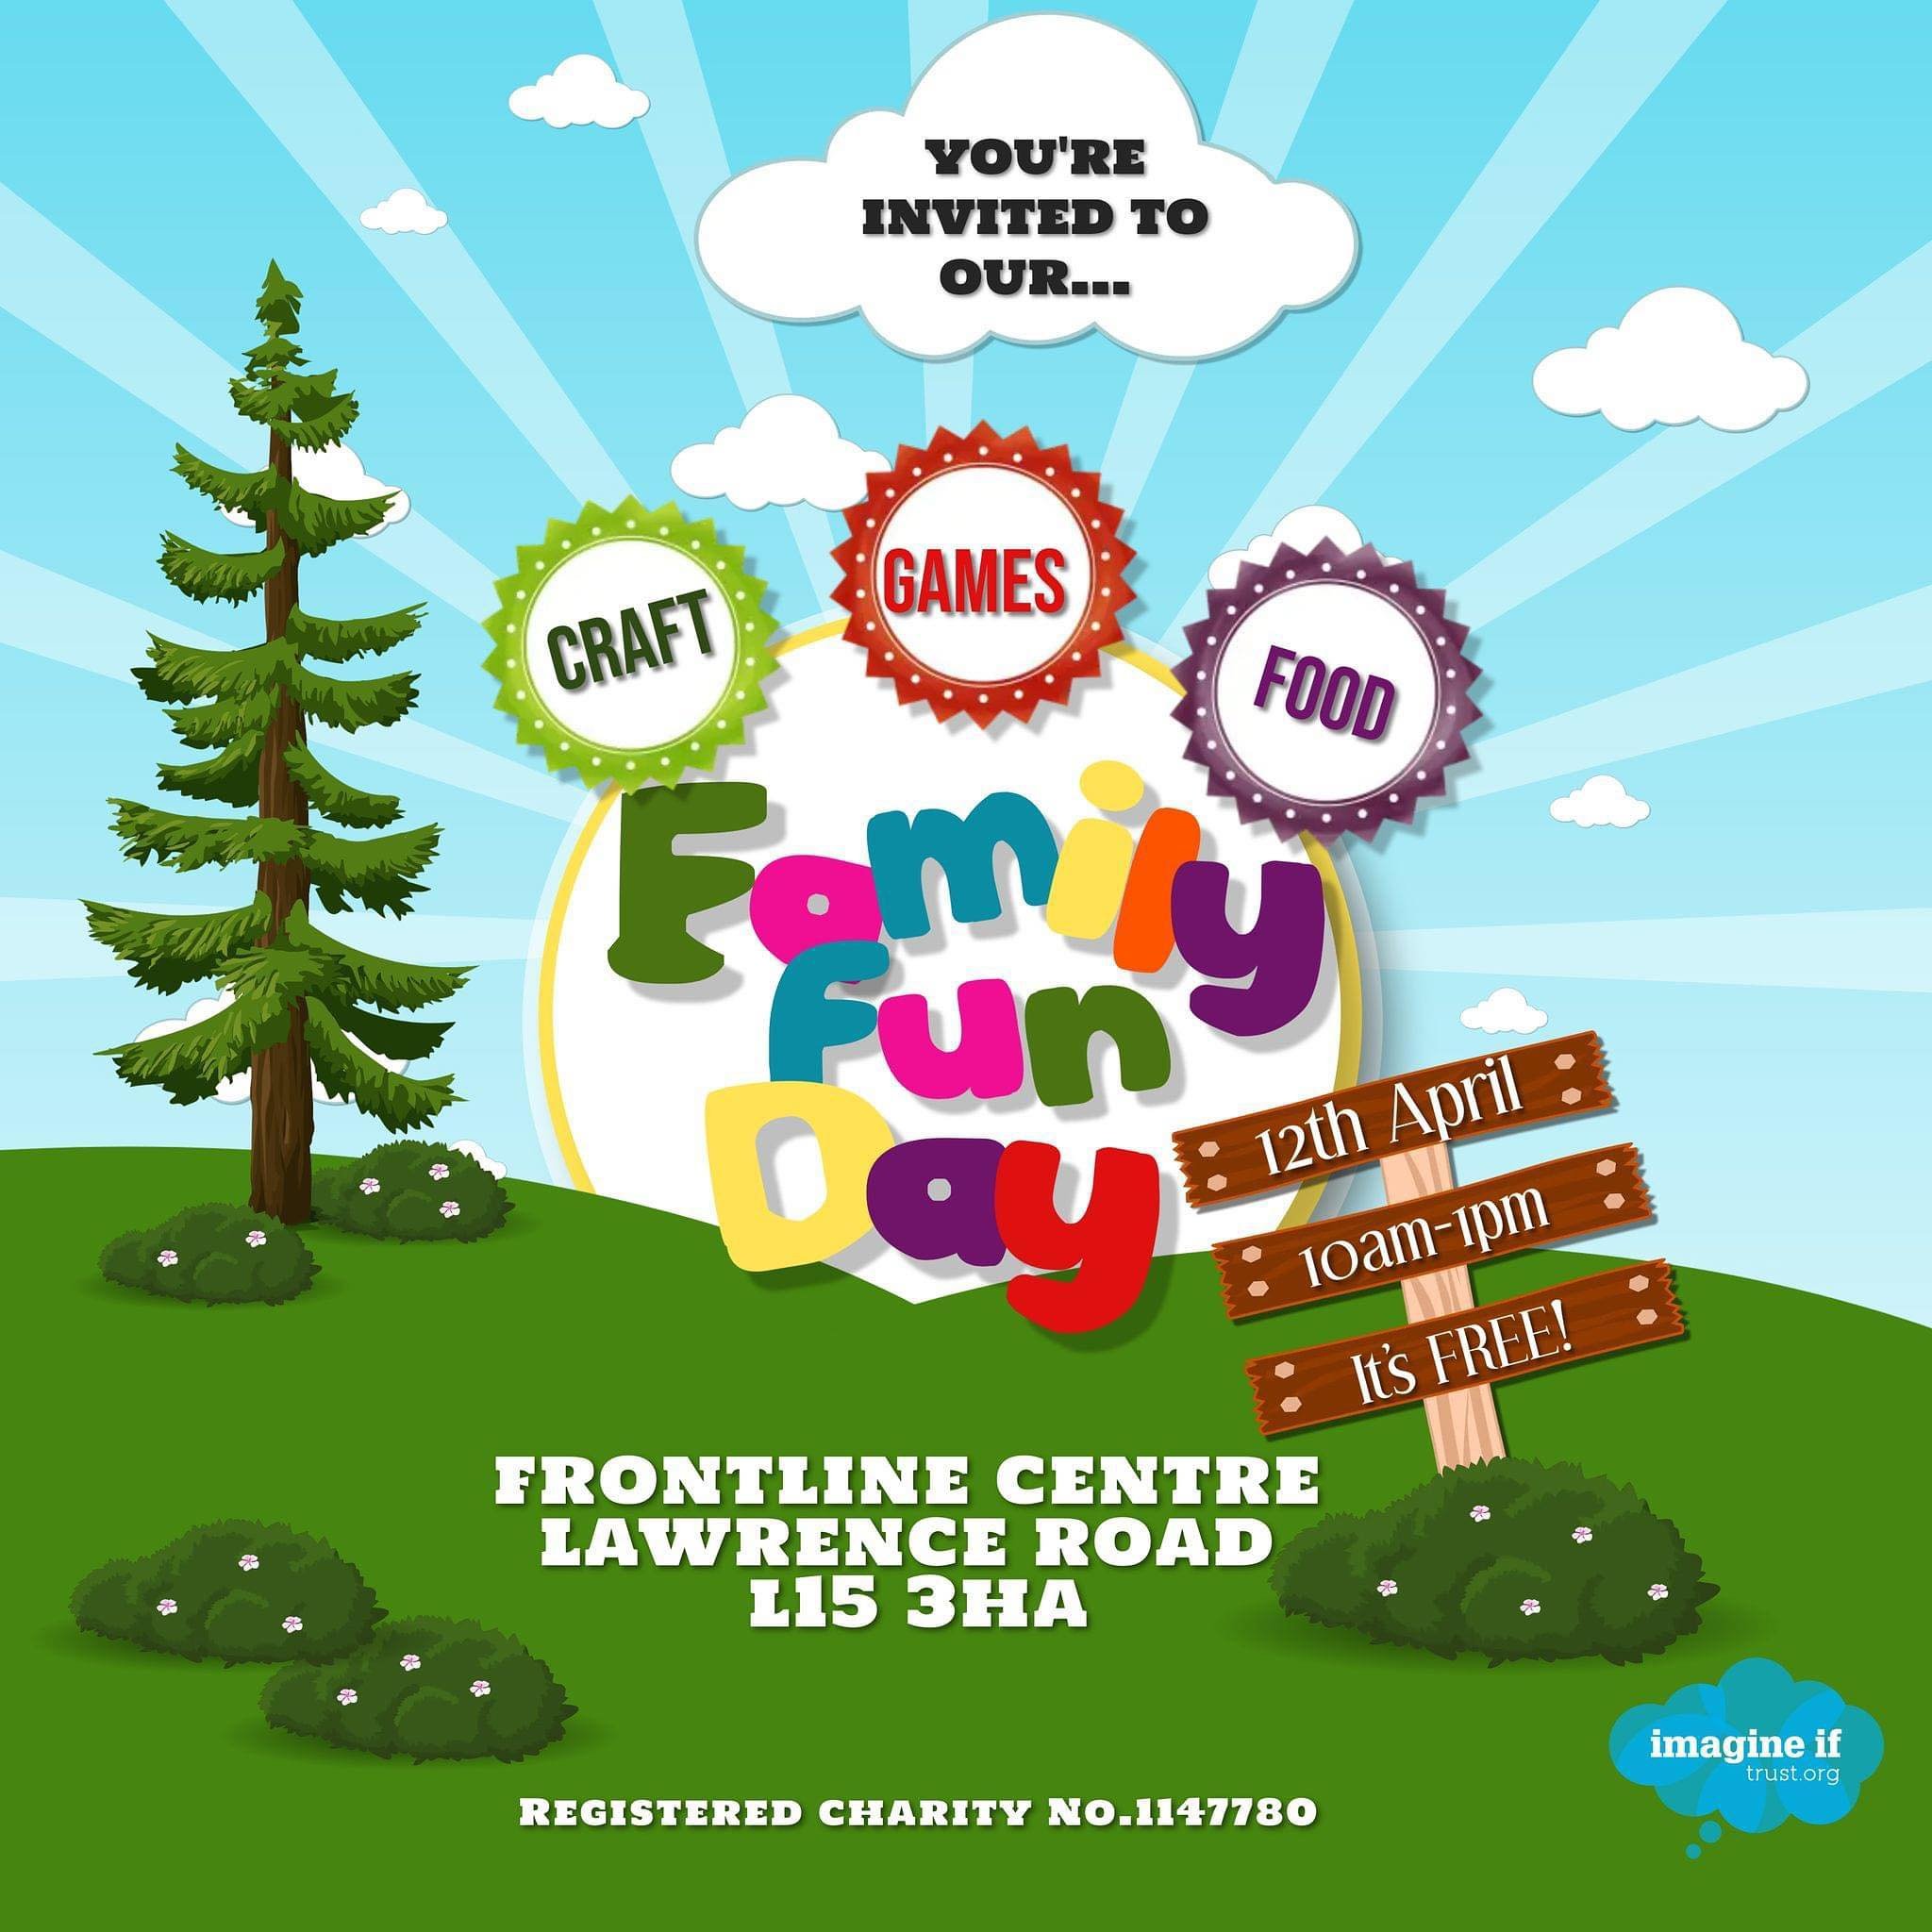 Come and join us tomorrow for our free Family Fun Day. We&rsquo;ll have bouncy castles, craft, games and a free bowl of scouse (or veggie option) for every child. Suitable for kids aged 3+ Doors open at 10am.